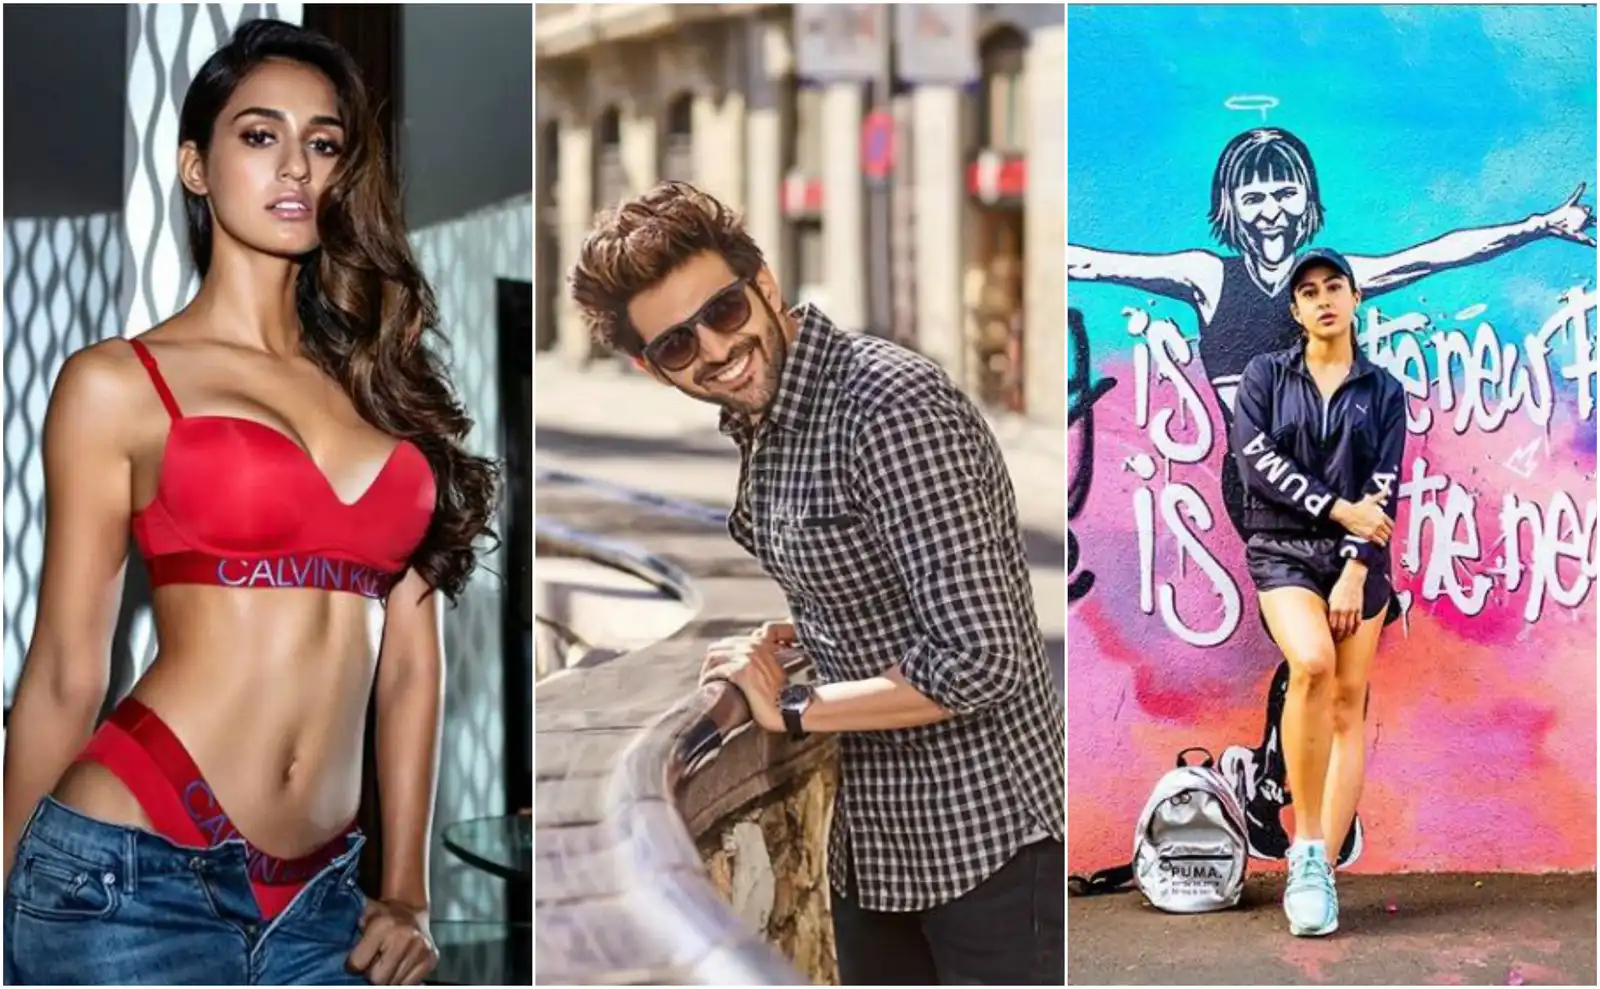 RANKED: The New Age Sensations Of Bollywood According To Their Instagram Followers